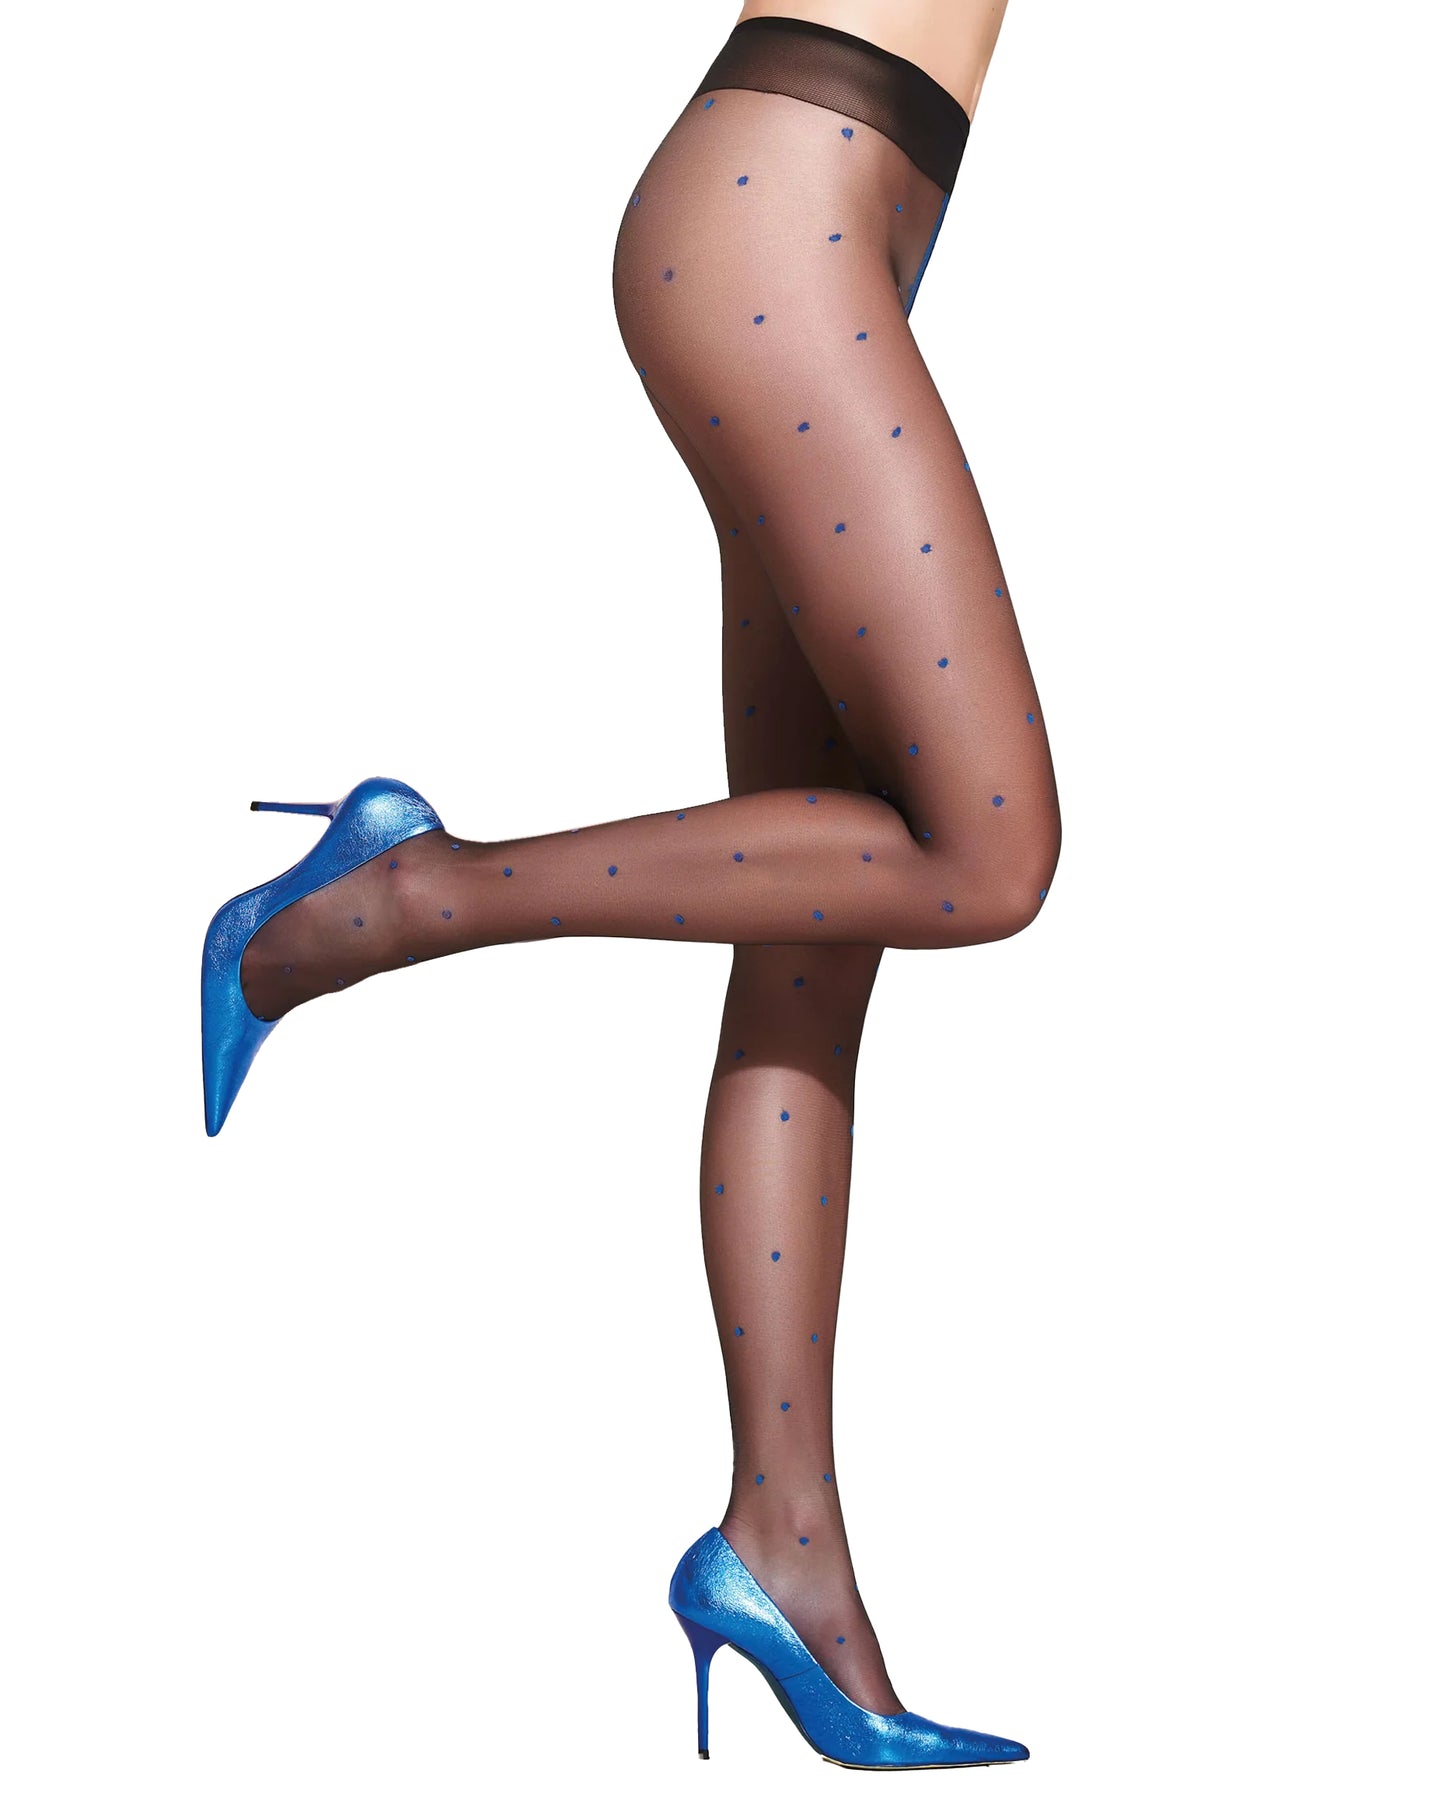 Trasparenze Anguria Collant - Sheer black tights with blue all over polka dot spot pattern